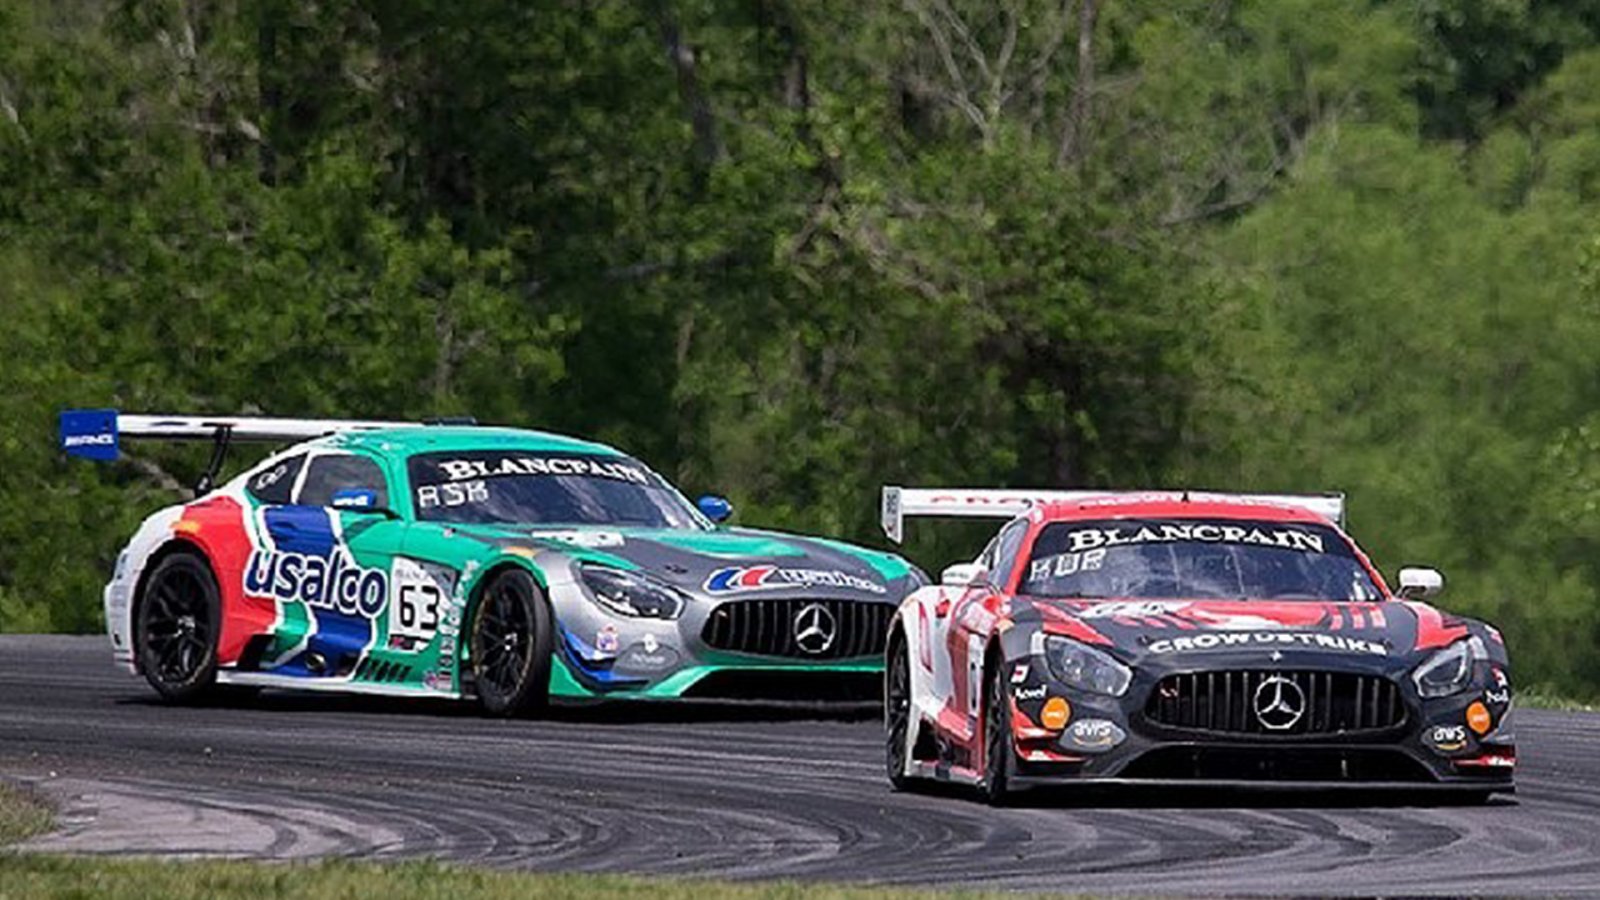 DXDT Racing Brings Double-Podium Momentum to CTMP